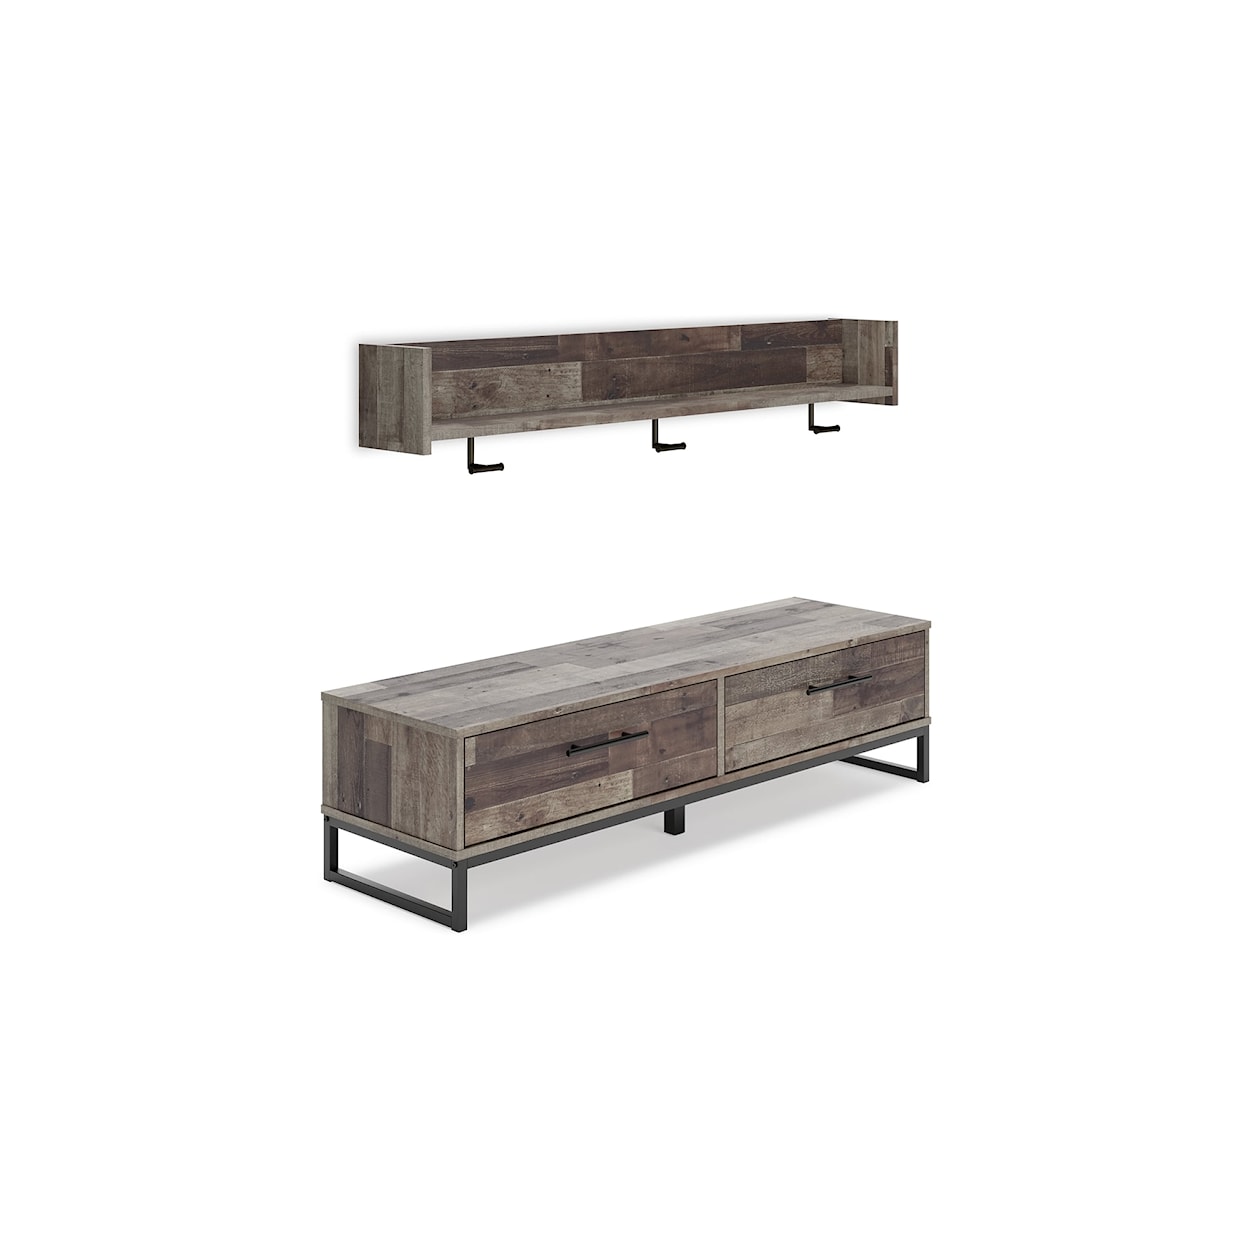 Signature Design by Ashley Neilsville Bench with Coat Rack